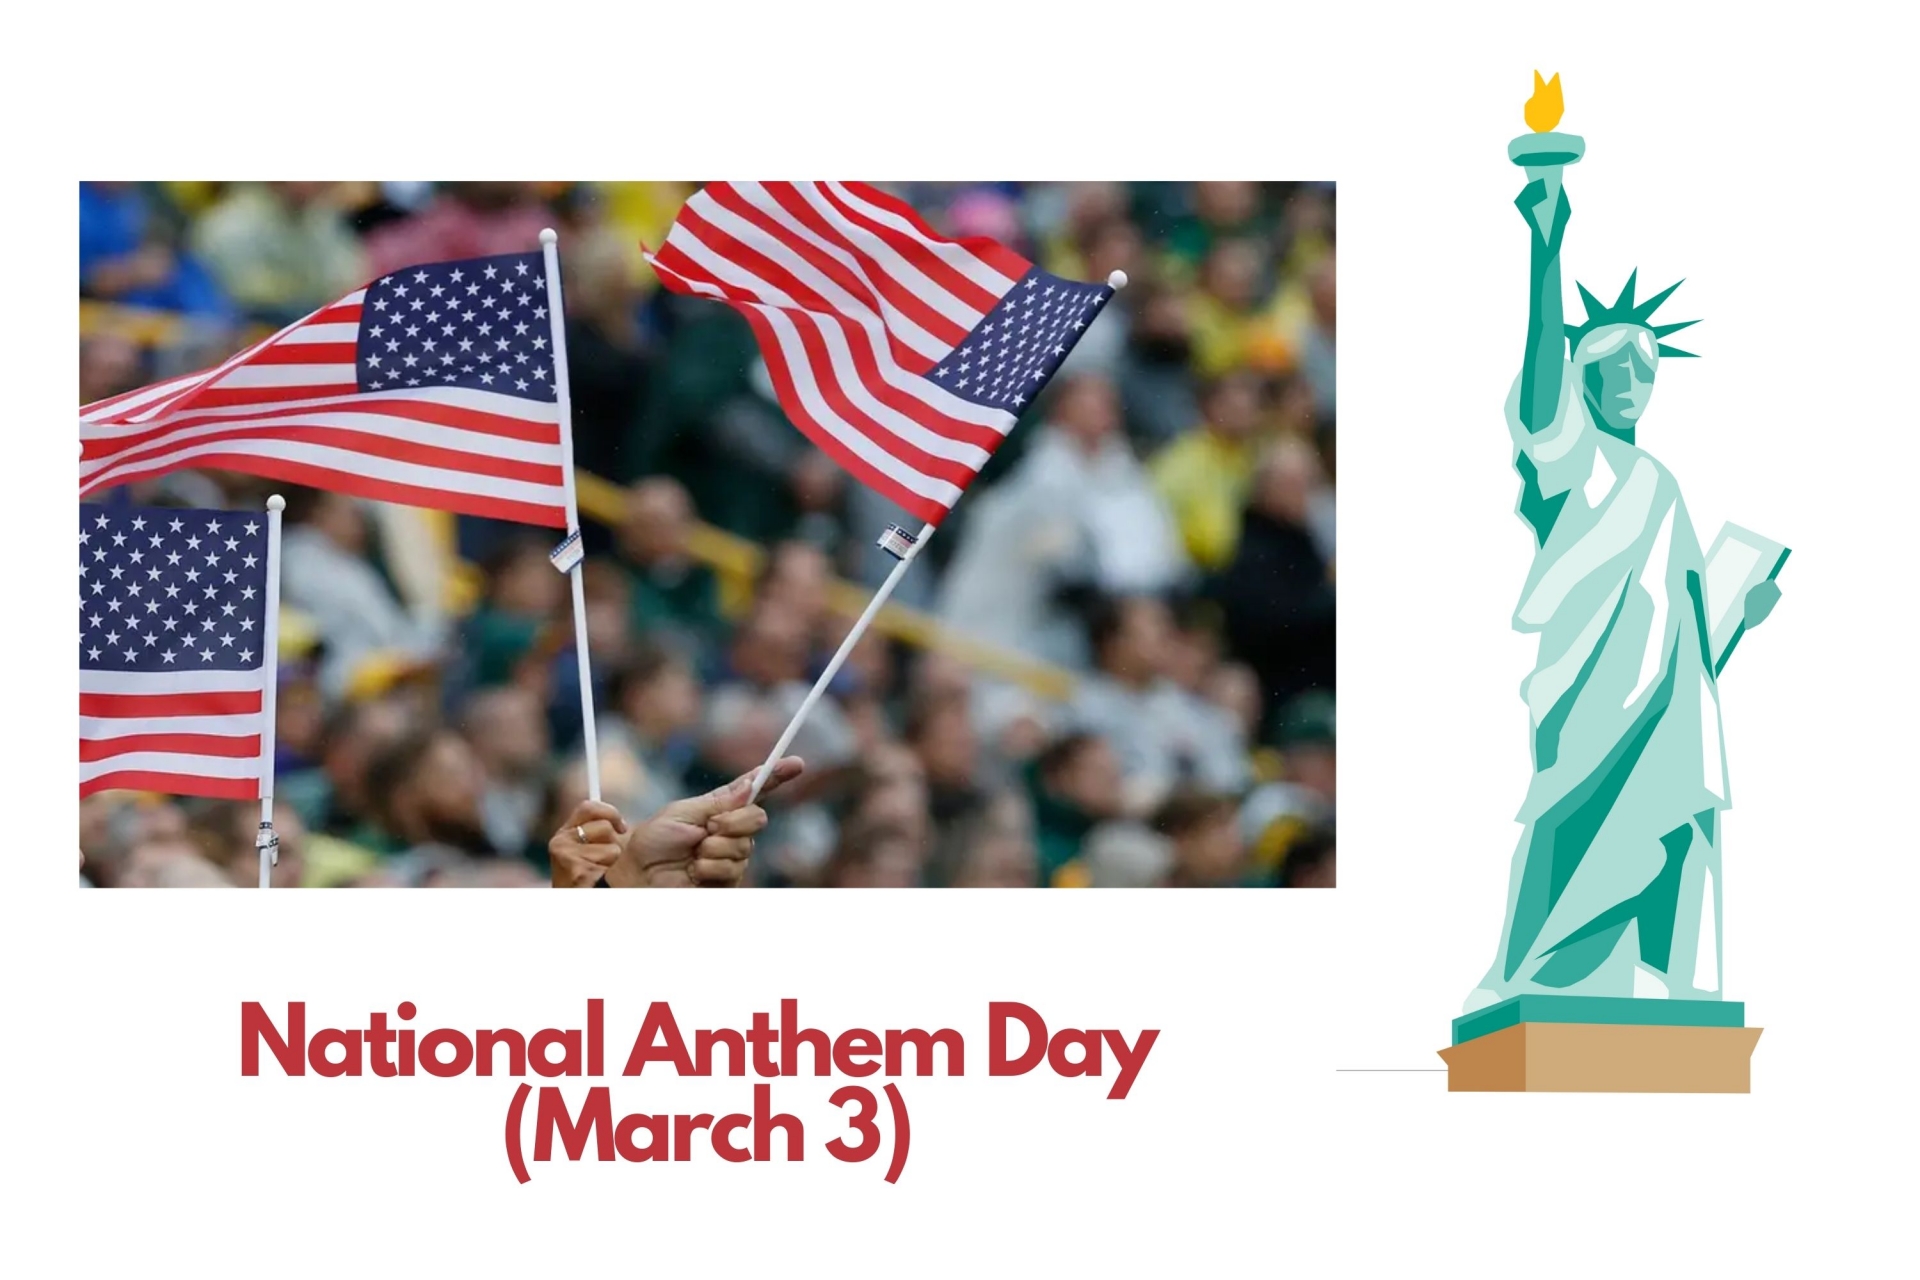 U.S National Anthem Day (March 3) History, Celebration and Facts